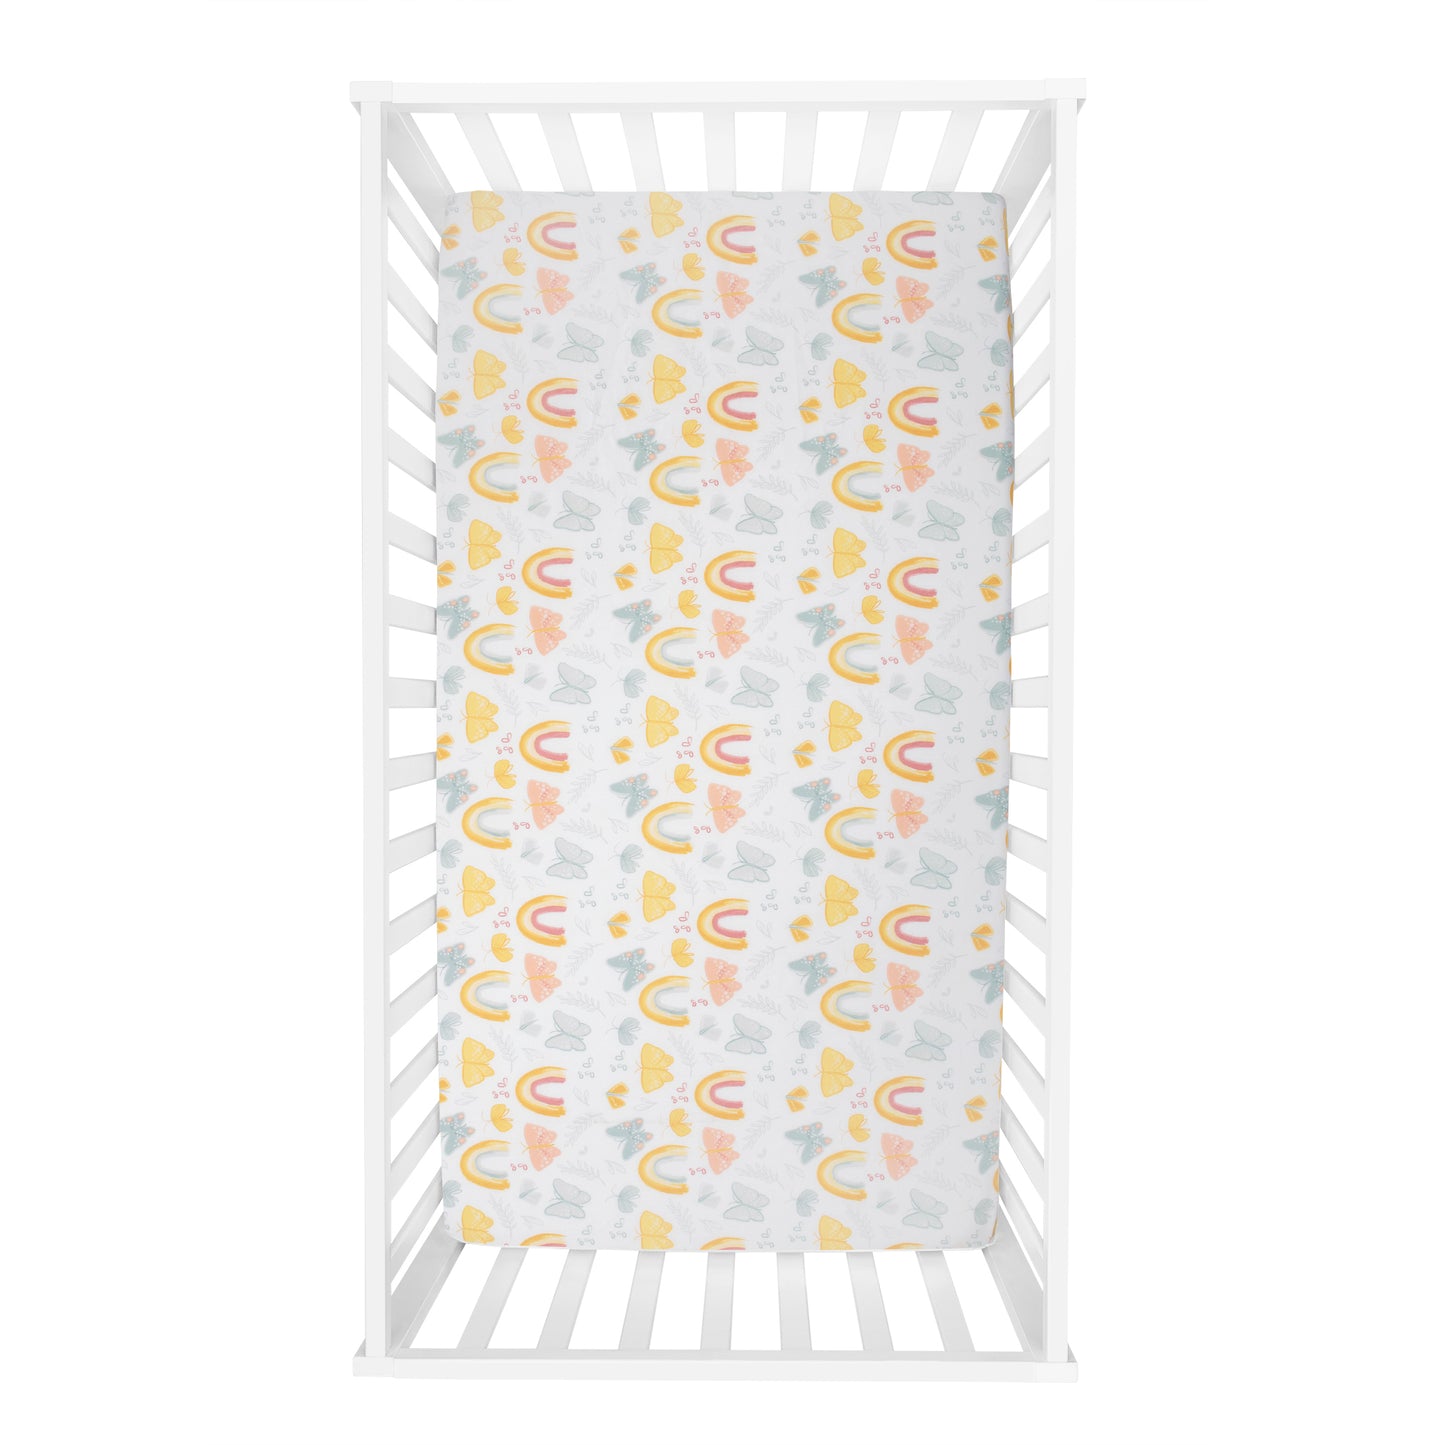 Butterflies & Sunshine 2-Pack Microfiber Fitted Crib Sheet Set - overhead view by Sammy & Lou®